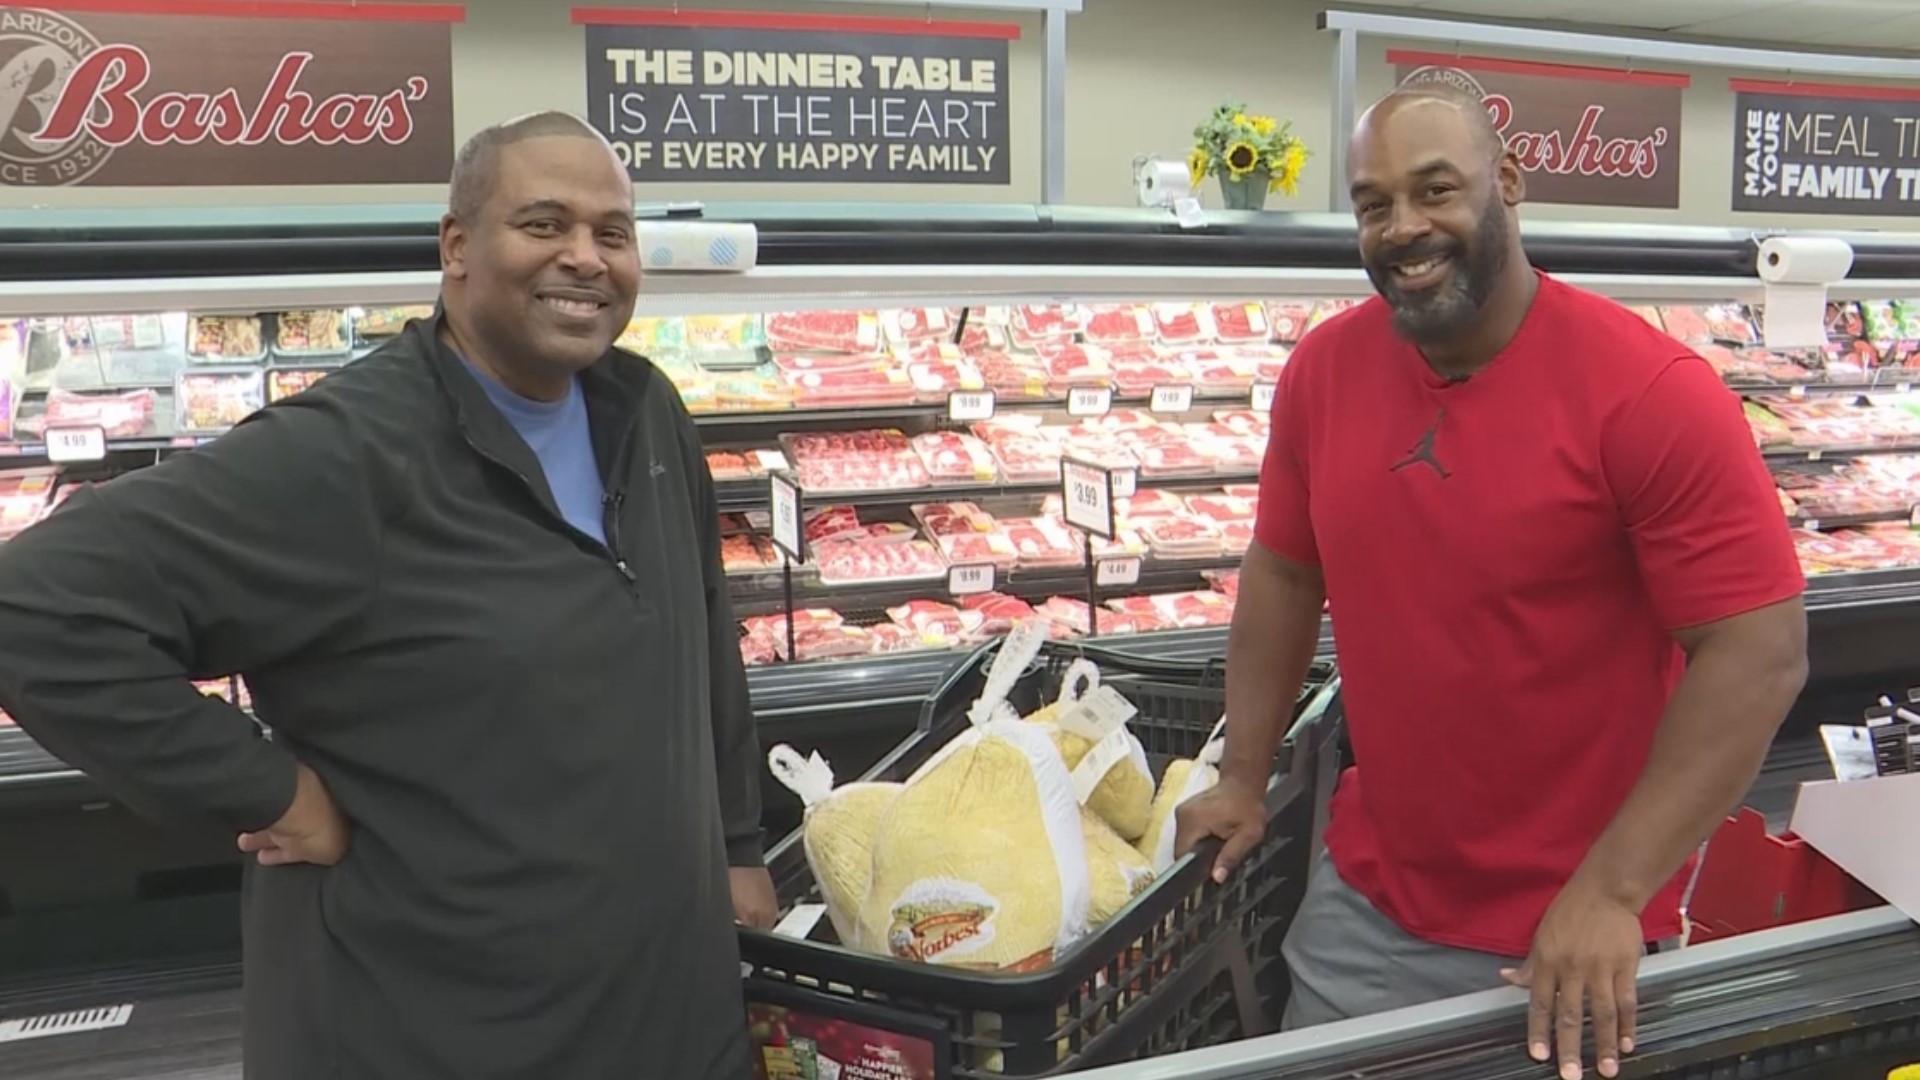 Former Eagles QB Donovan McNabb is no stranger to Turkey Tuesday. He stopped by Bashas for his Turkey Tuesday donation with former 12 Sports anchor Bruce Cooper.